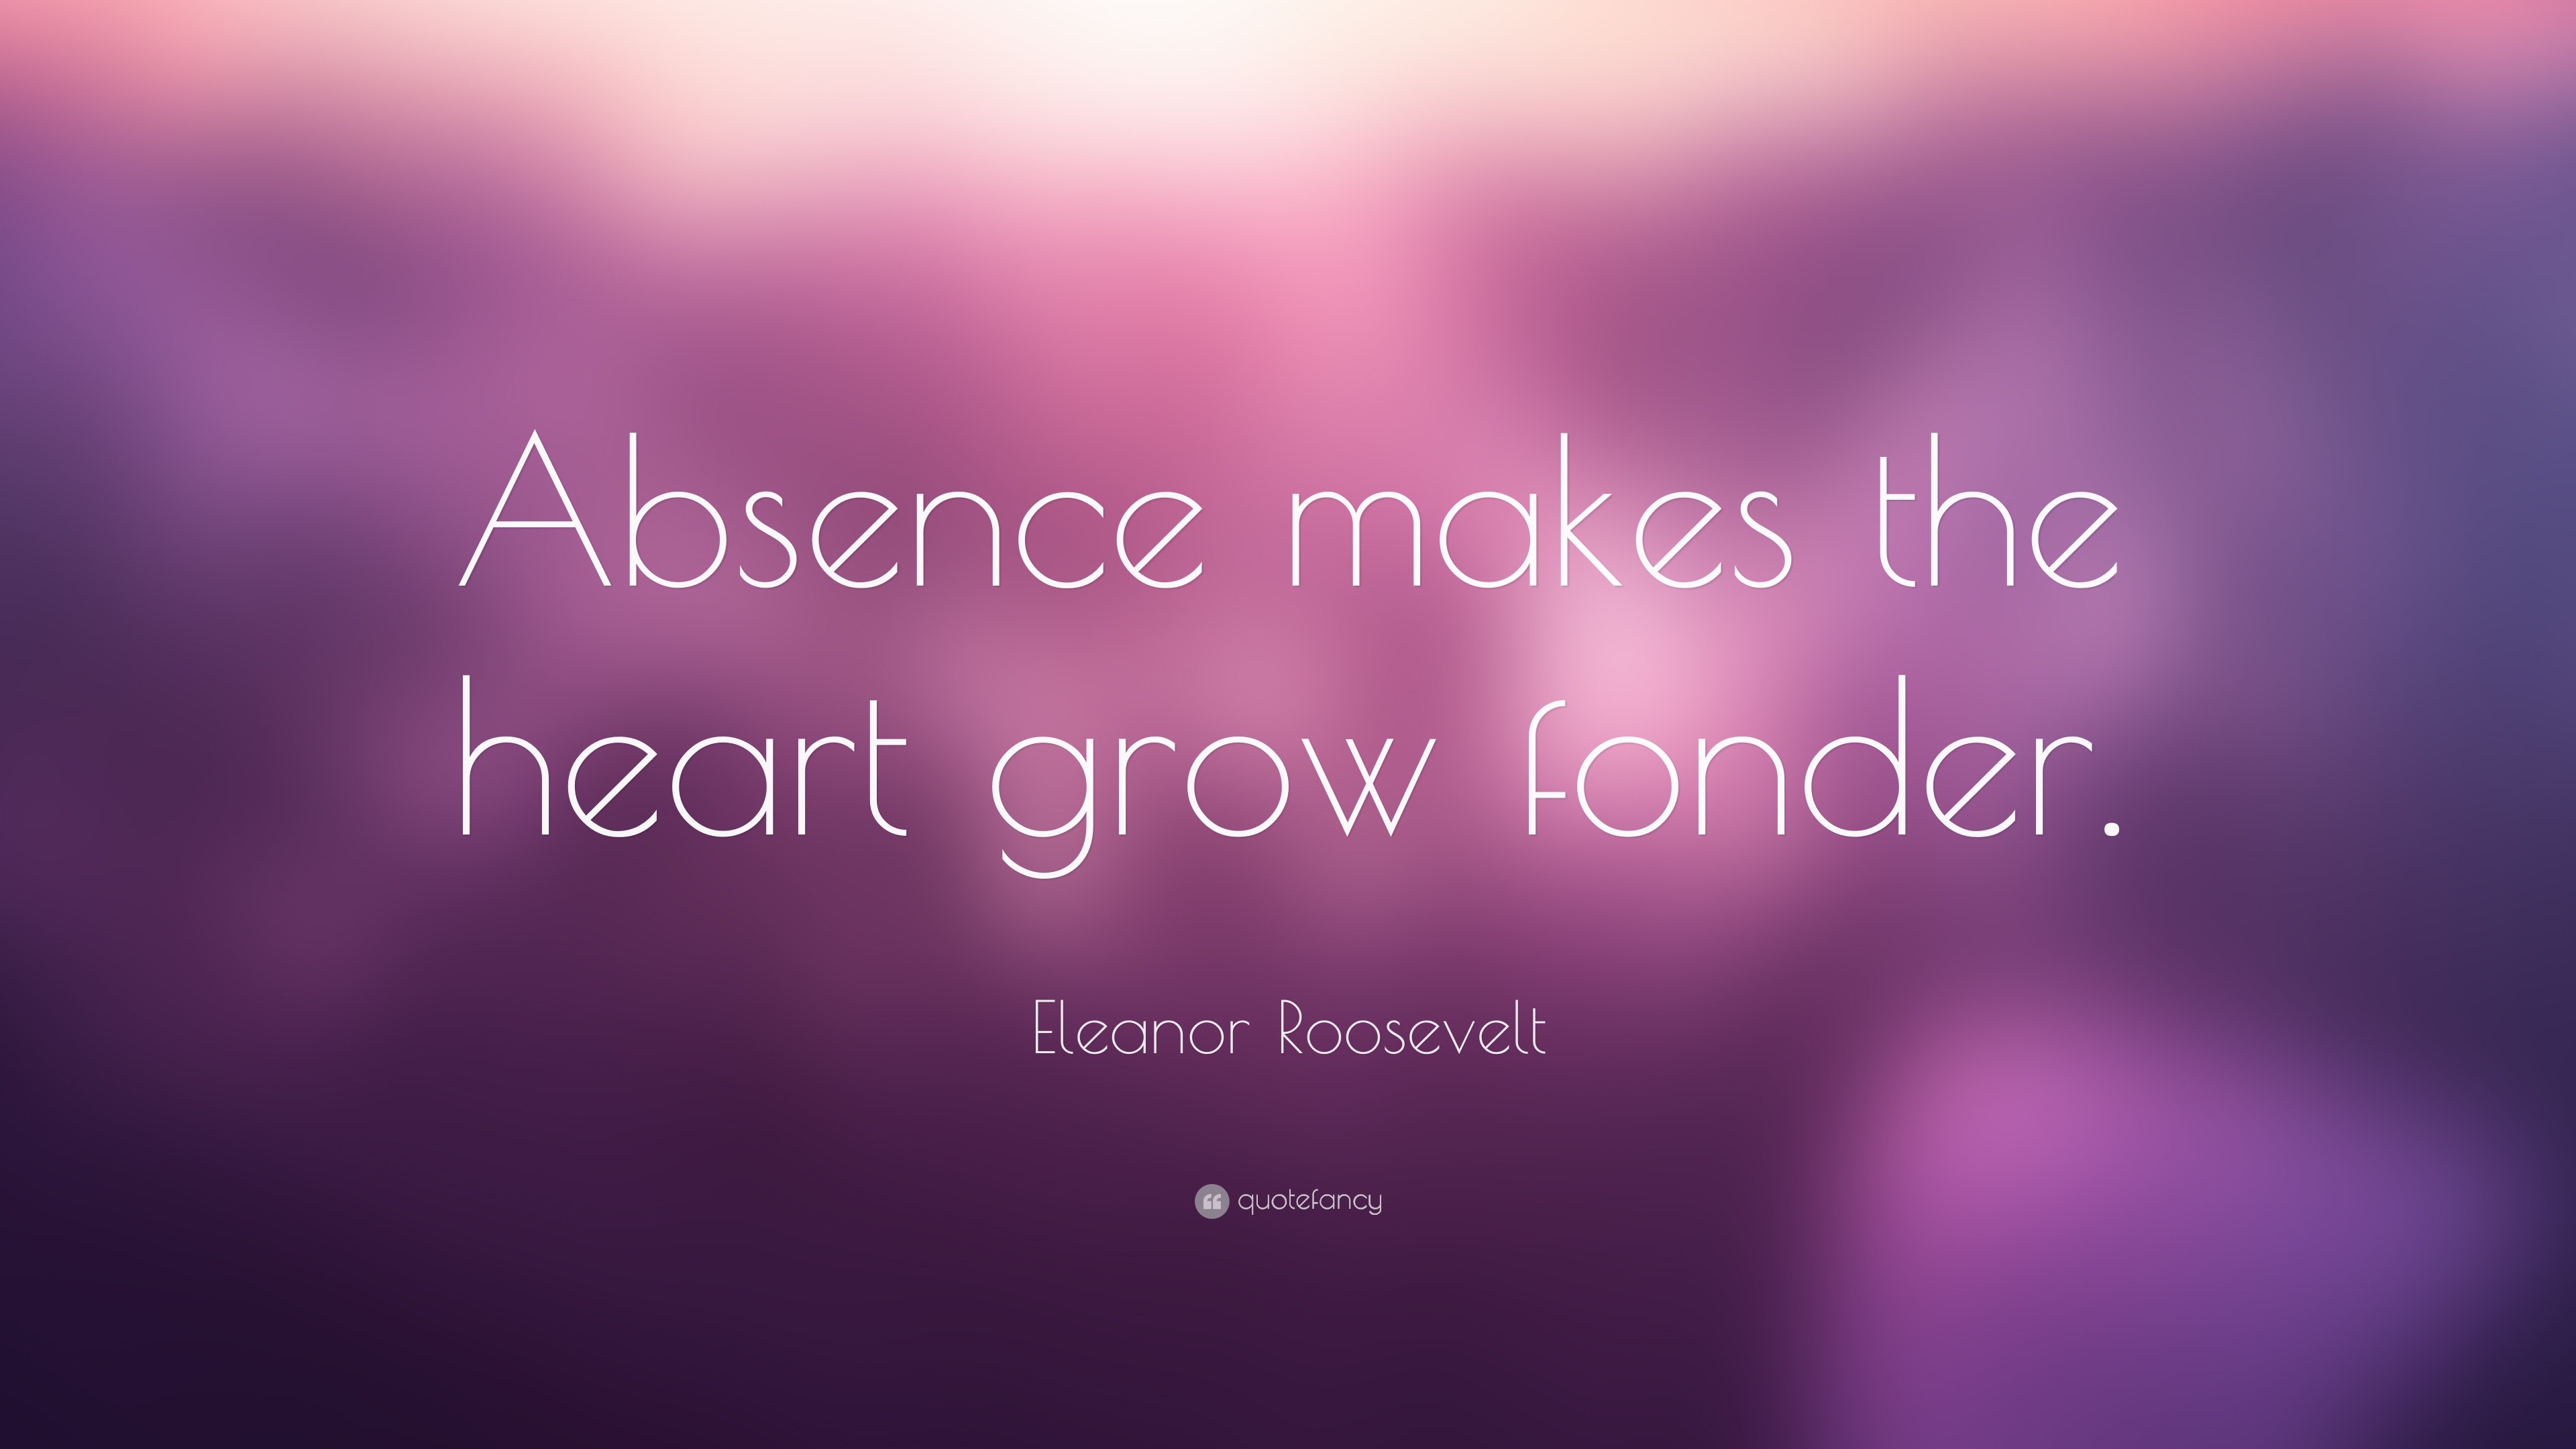 Eleanor Roosevelt Quote: “Absence makes the heart grow fonder.” (24